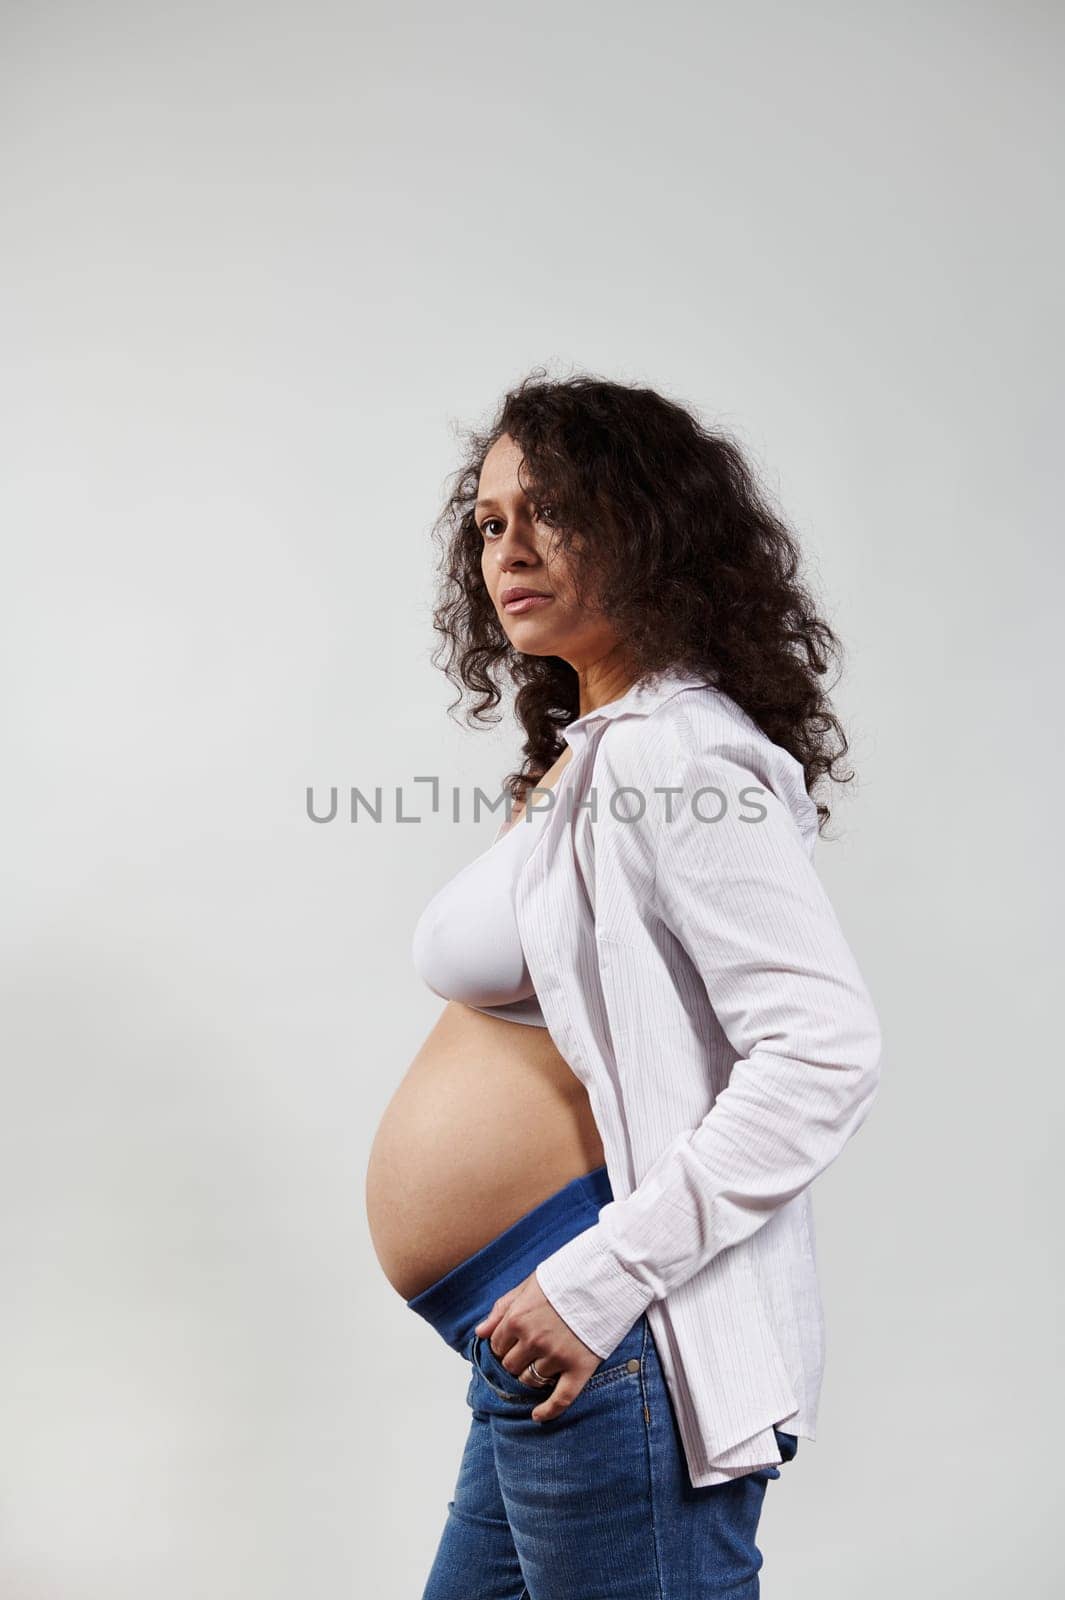 Vertical studio portrait of curly haired brunette pregnant woman, wearing blue jeans and unbuttoned white shirt, posing bare belly over isolated white background. Happy pregnancy and maternity concept